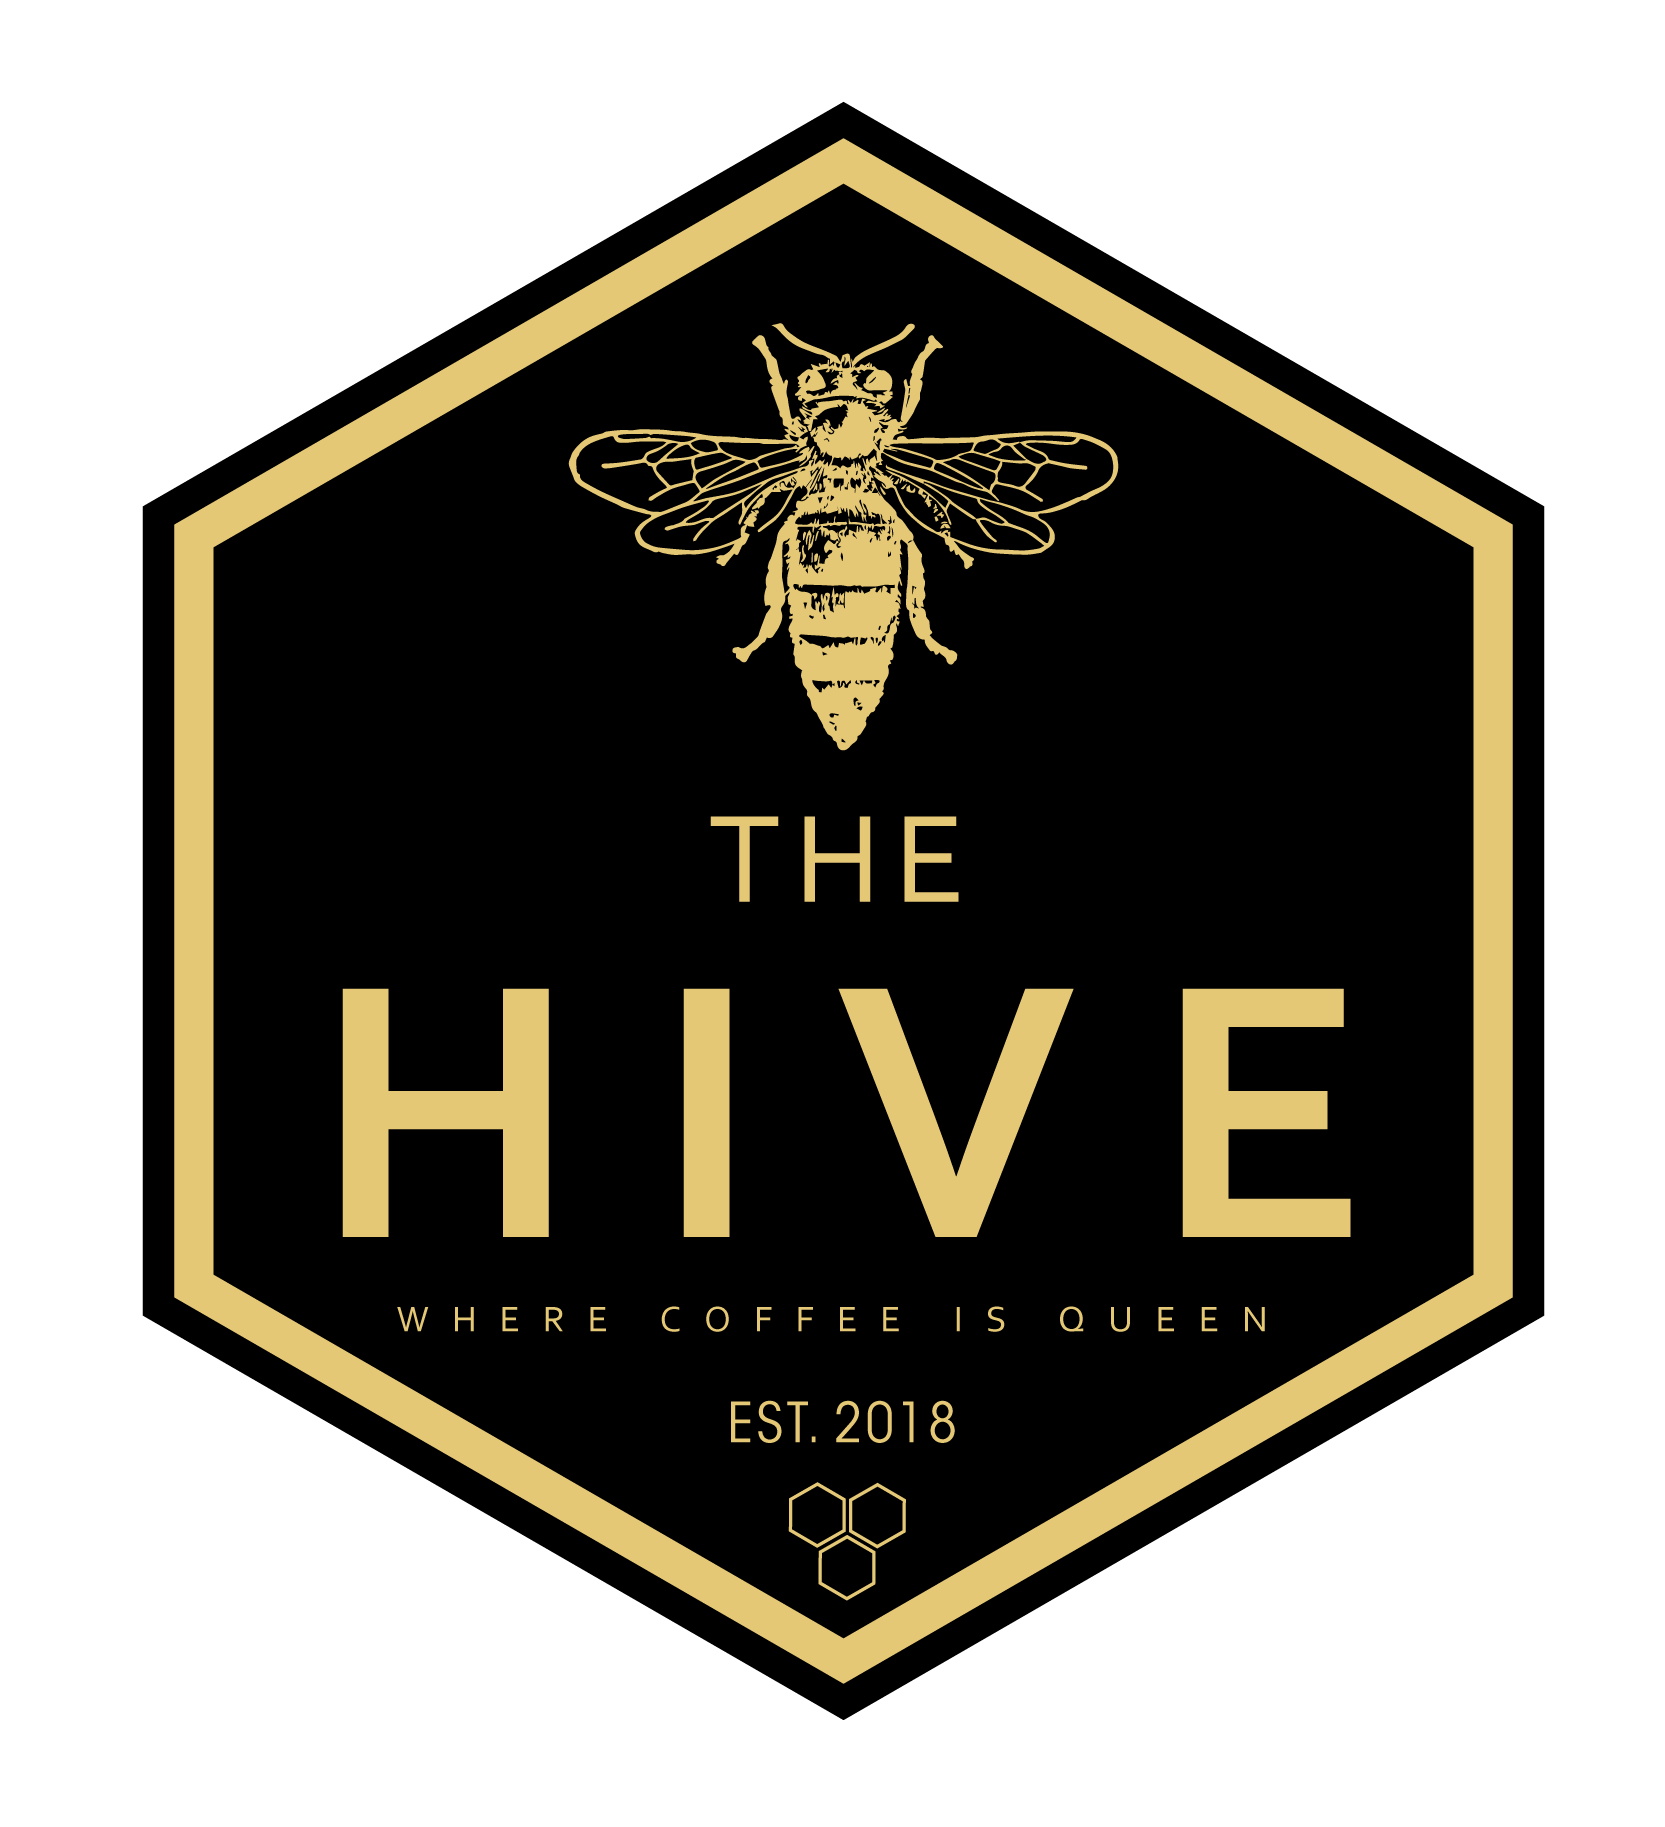 The Hive, Where Coffee is Queen, Est. 2018 logo